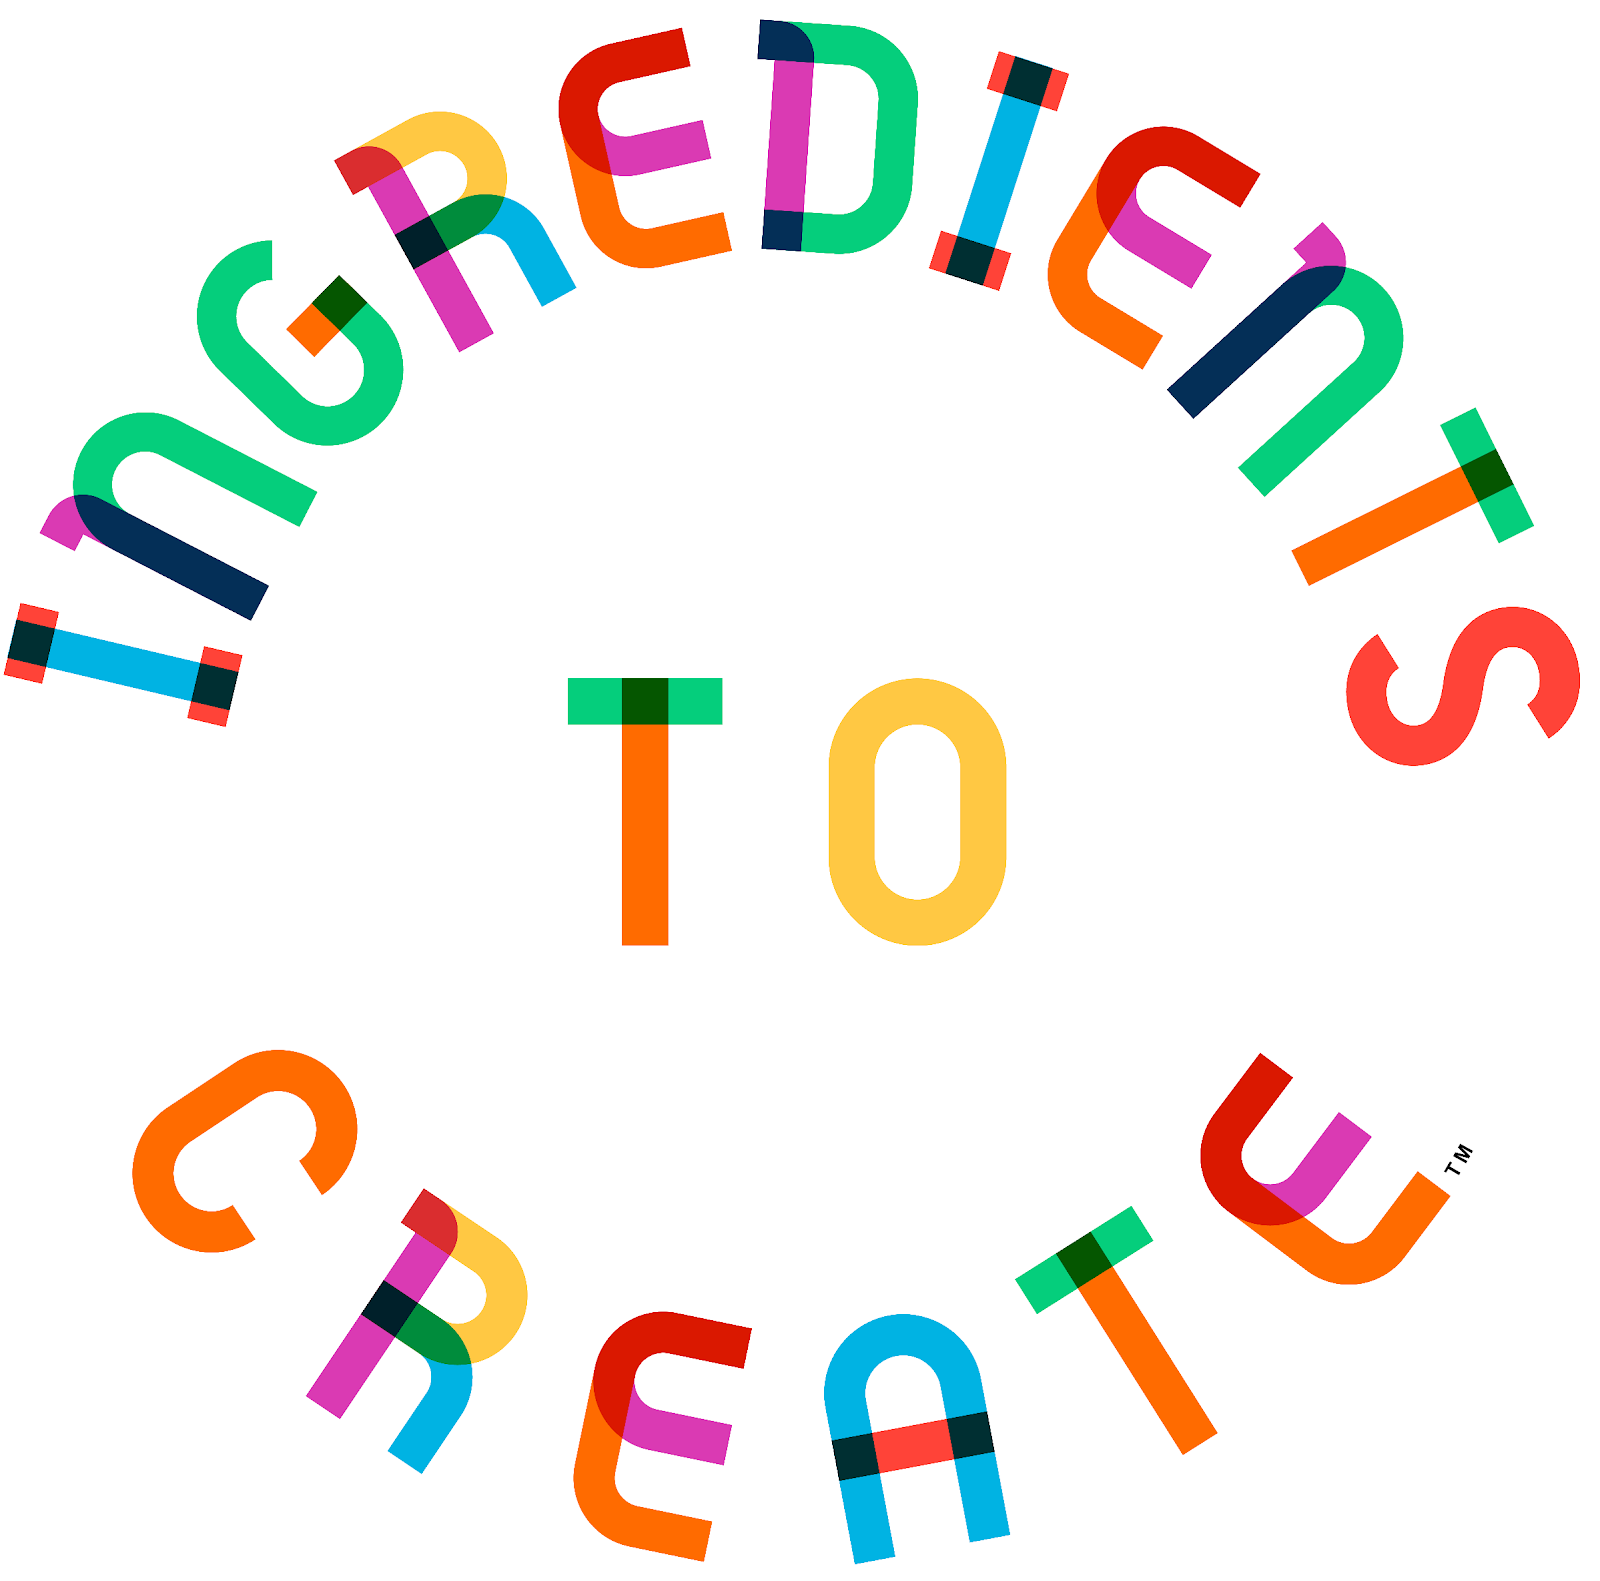 Ingredients to Create